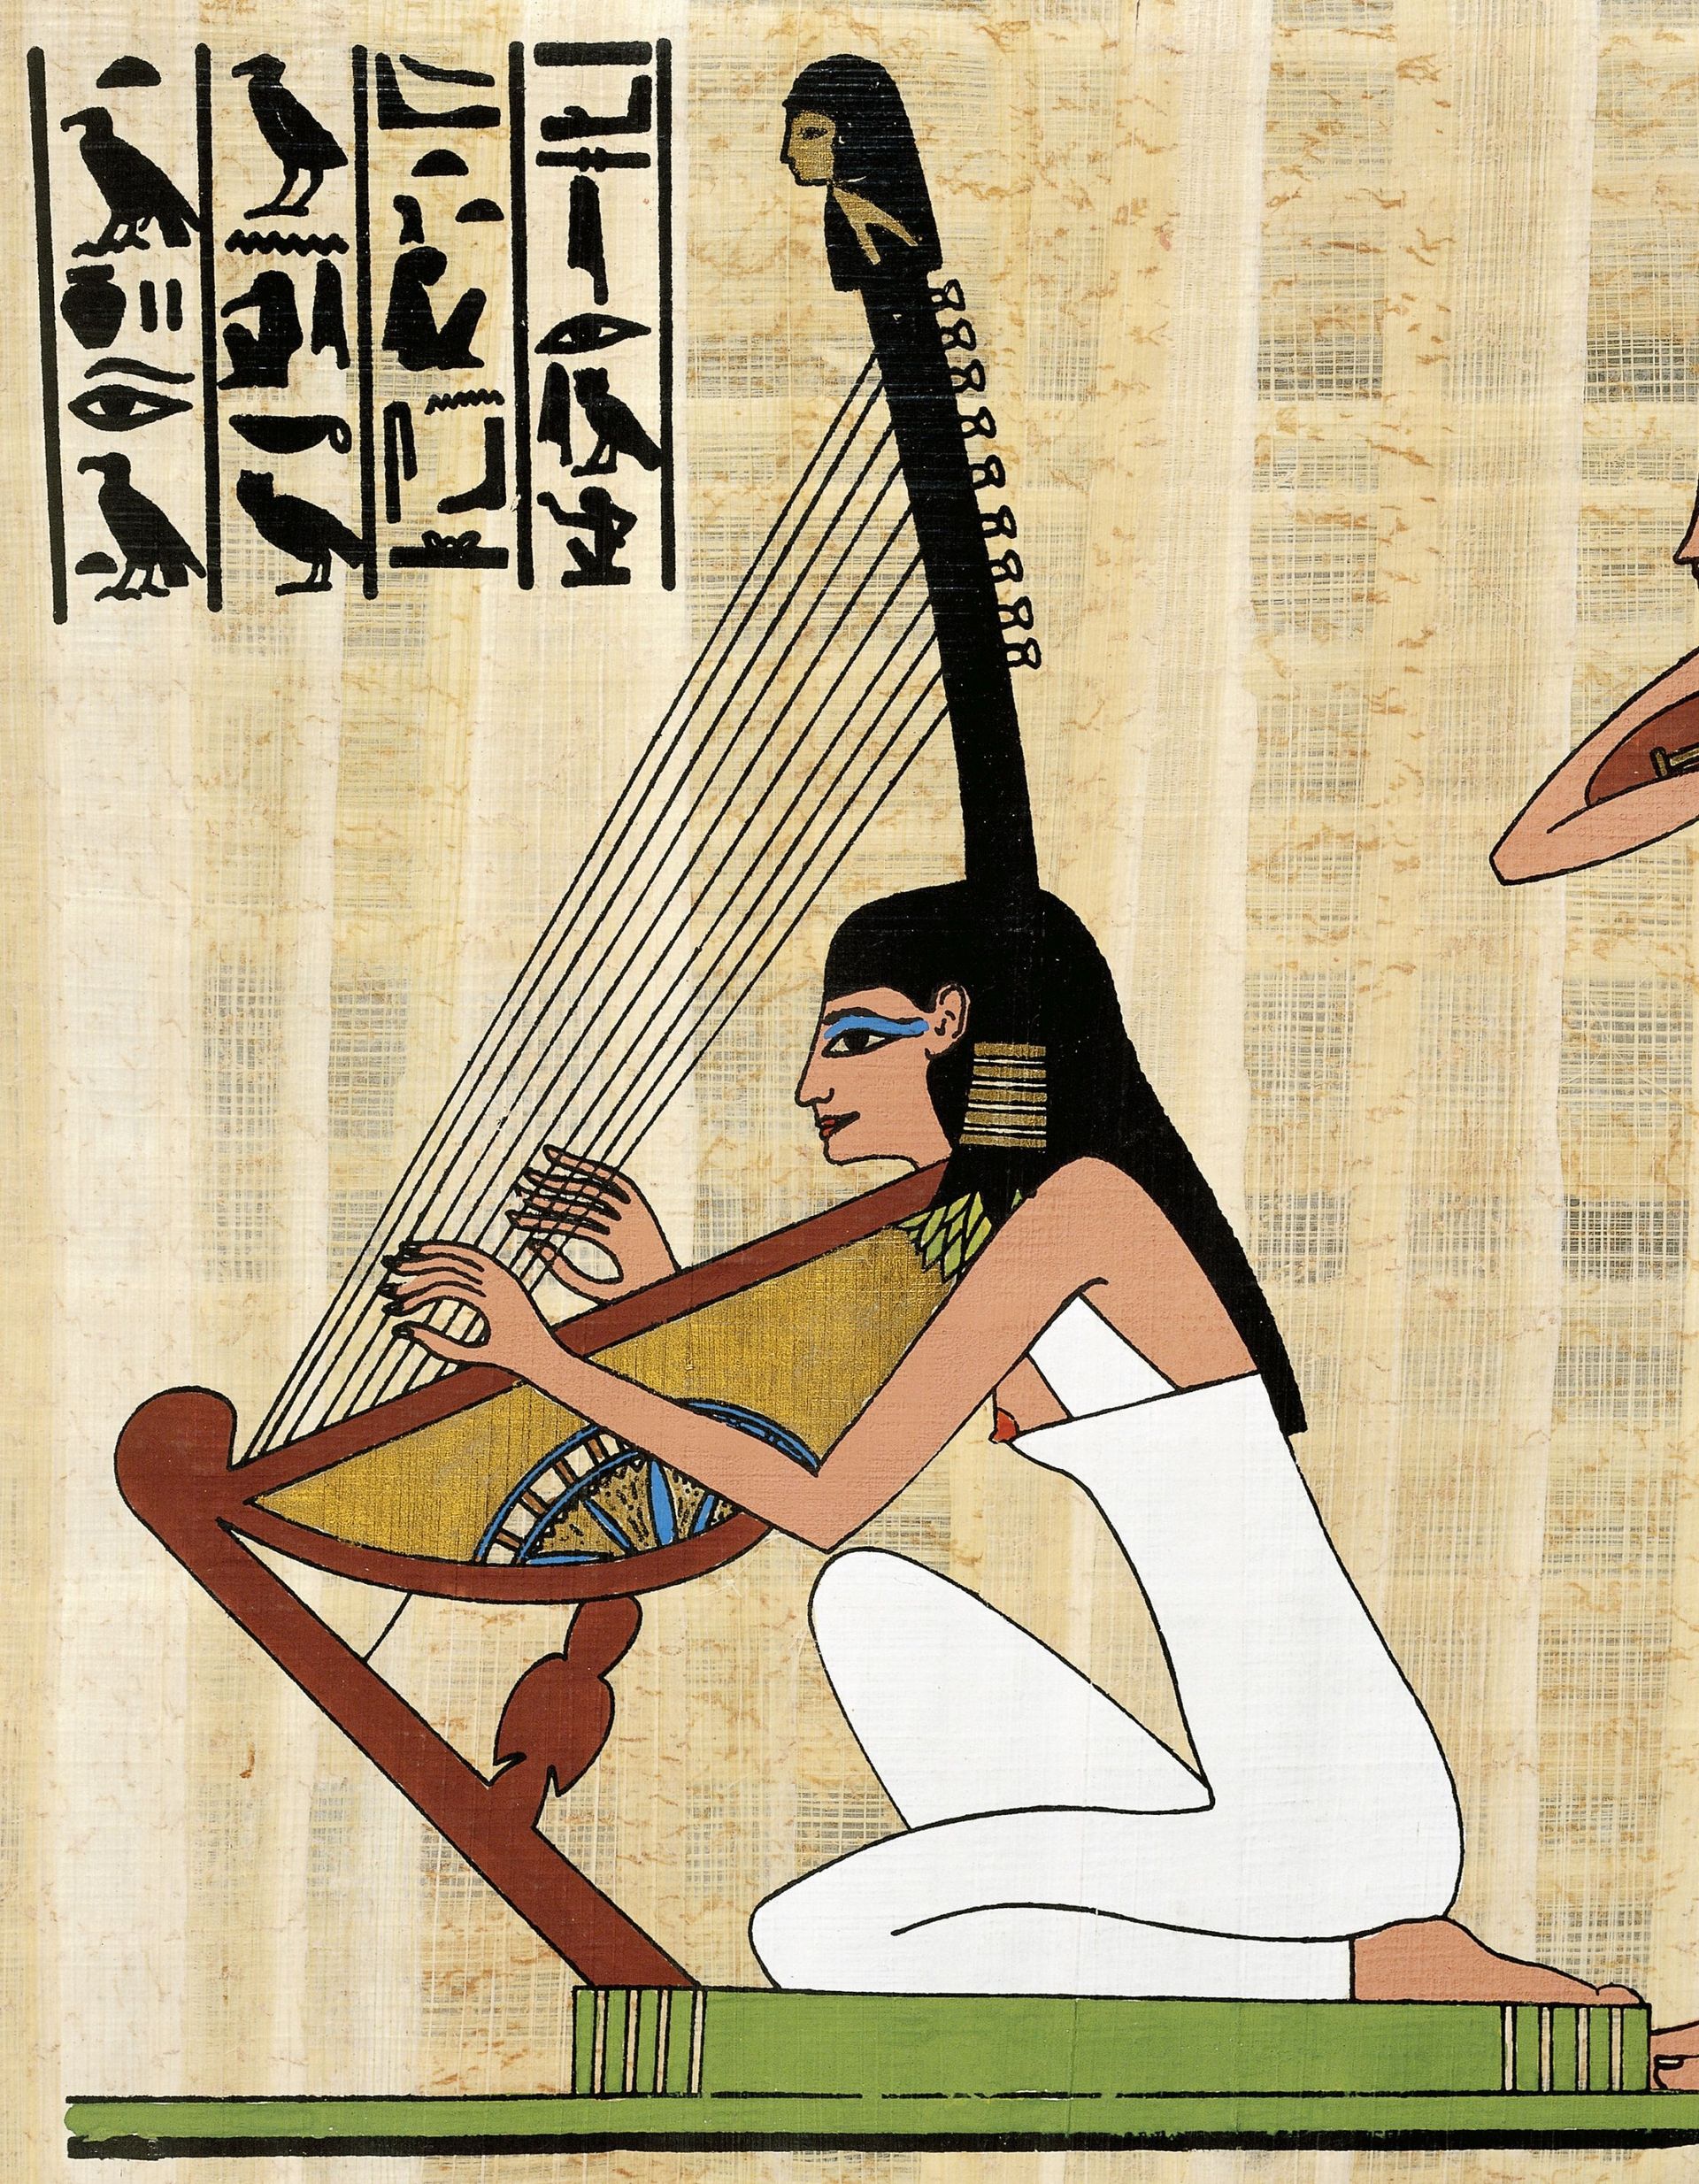 Harp player, papyrus, reconstruction of a fresco from the tomb of Rekhmire at Thebes, original dating from the Dynasty XVIII. Egyptian civilisation.